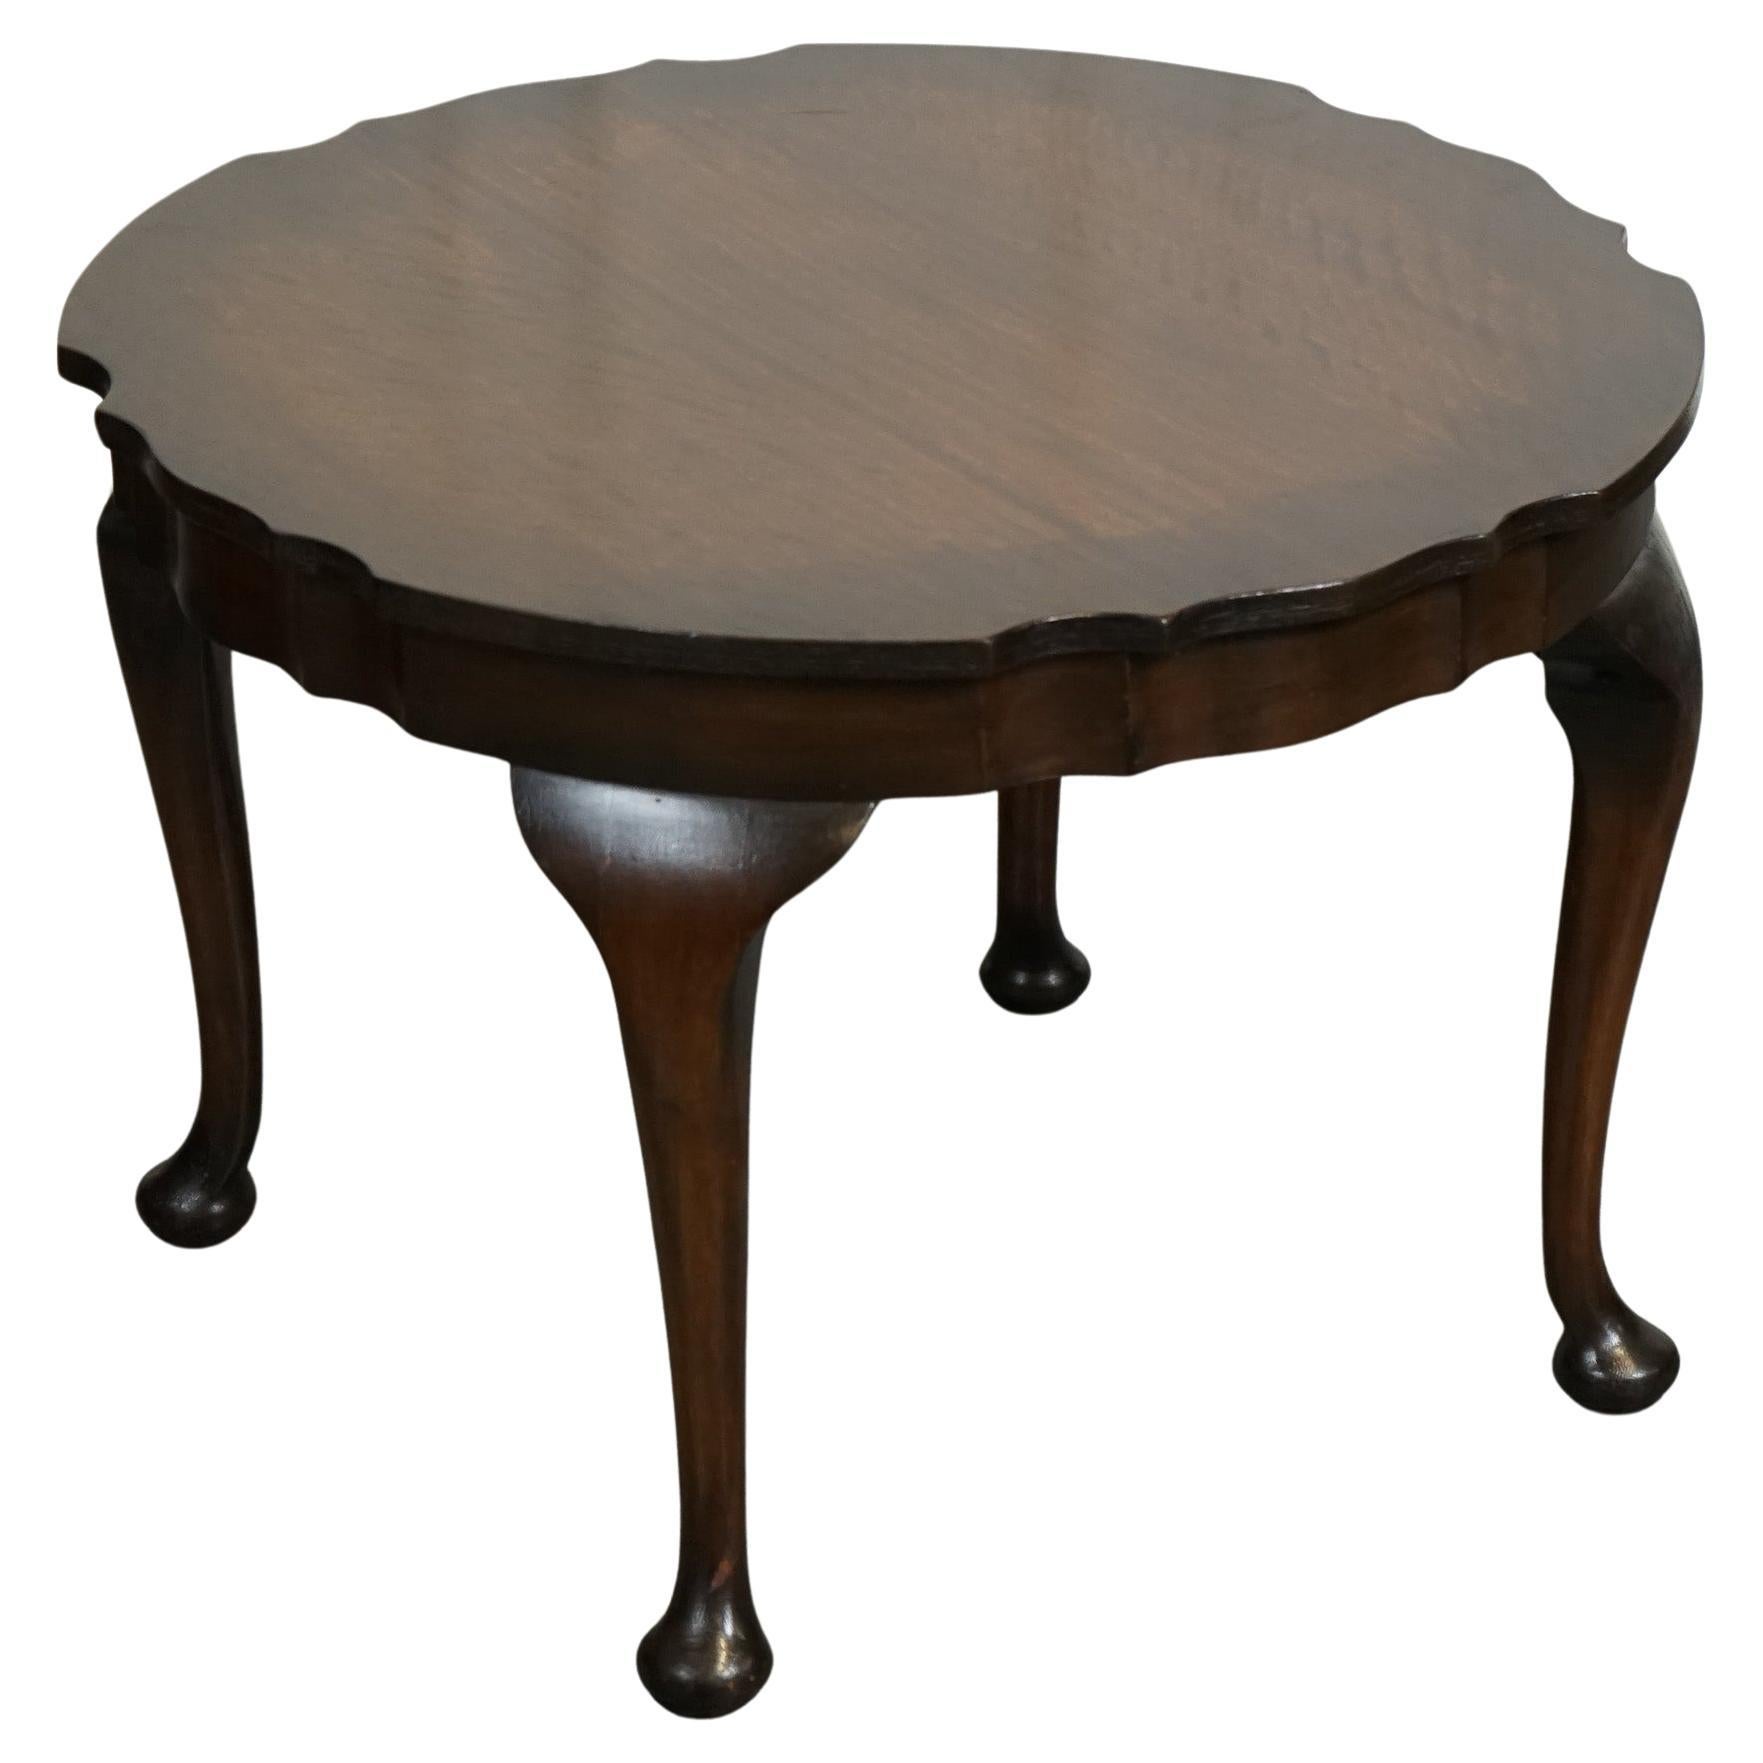 LOVELY SMALL PIE CRUST SHAPED EDGES HARDWOOD SIDE TABLE j1 For Sale